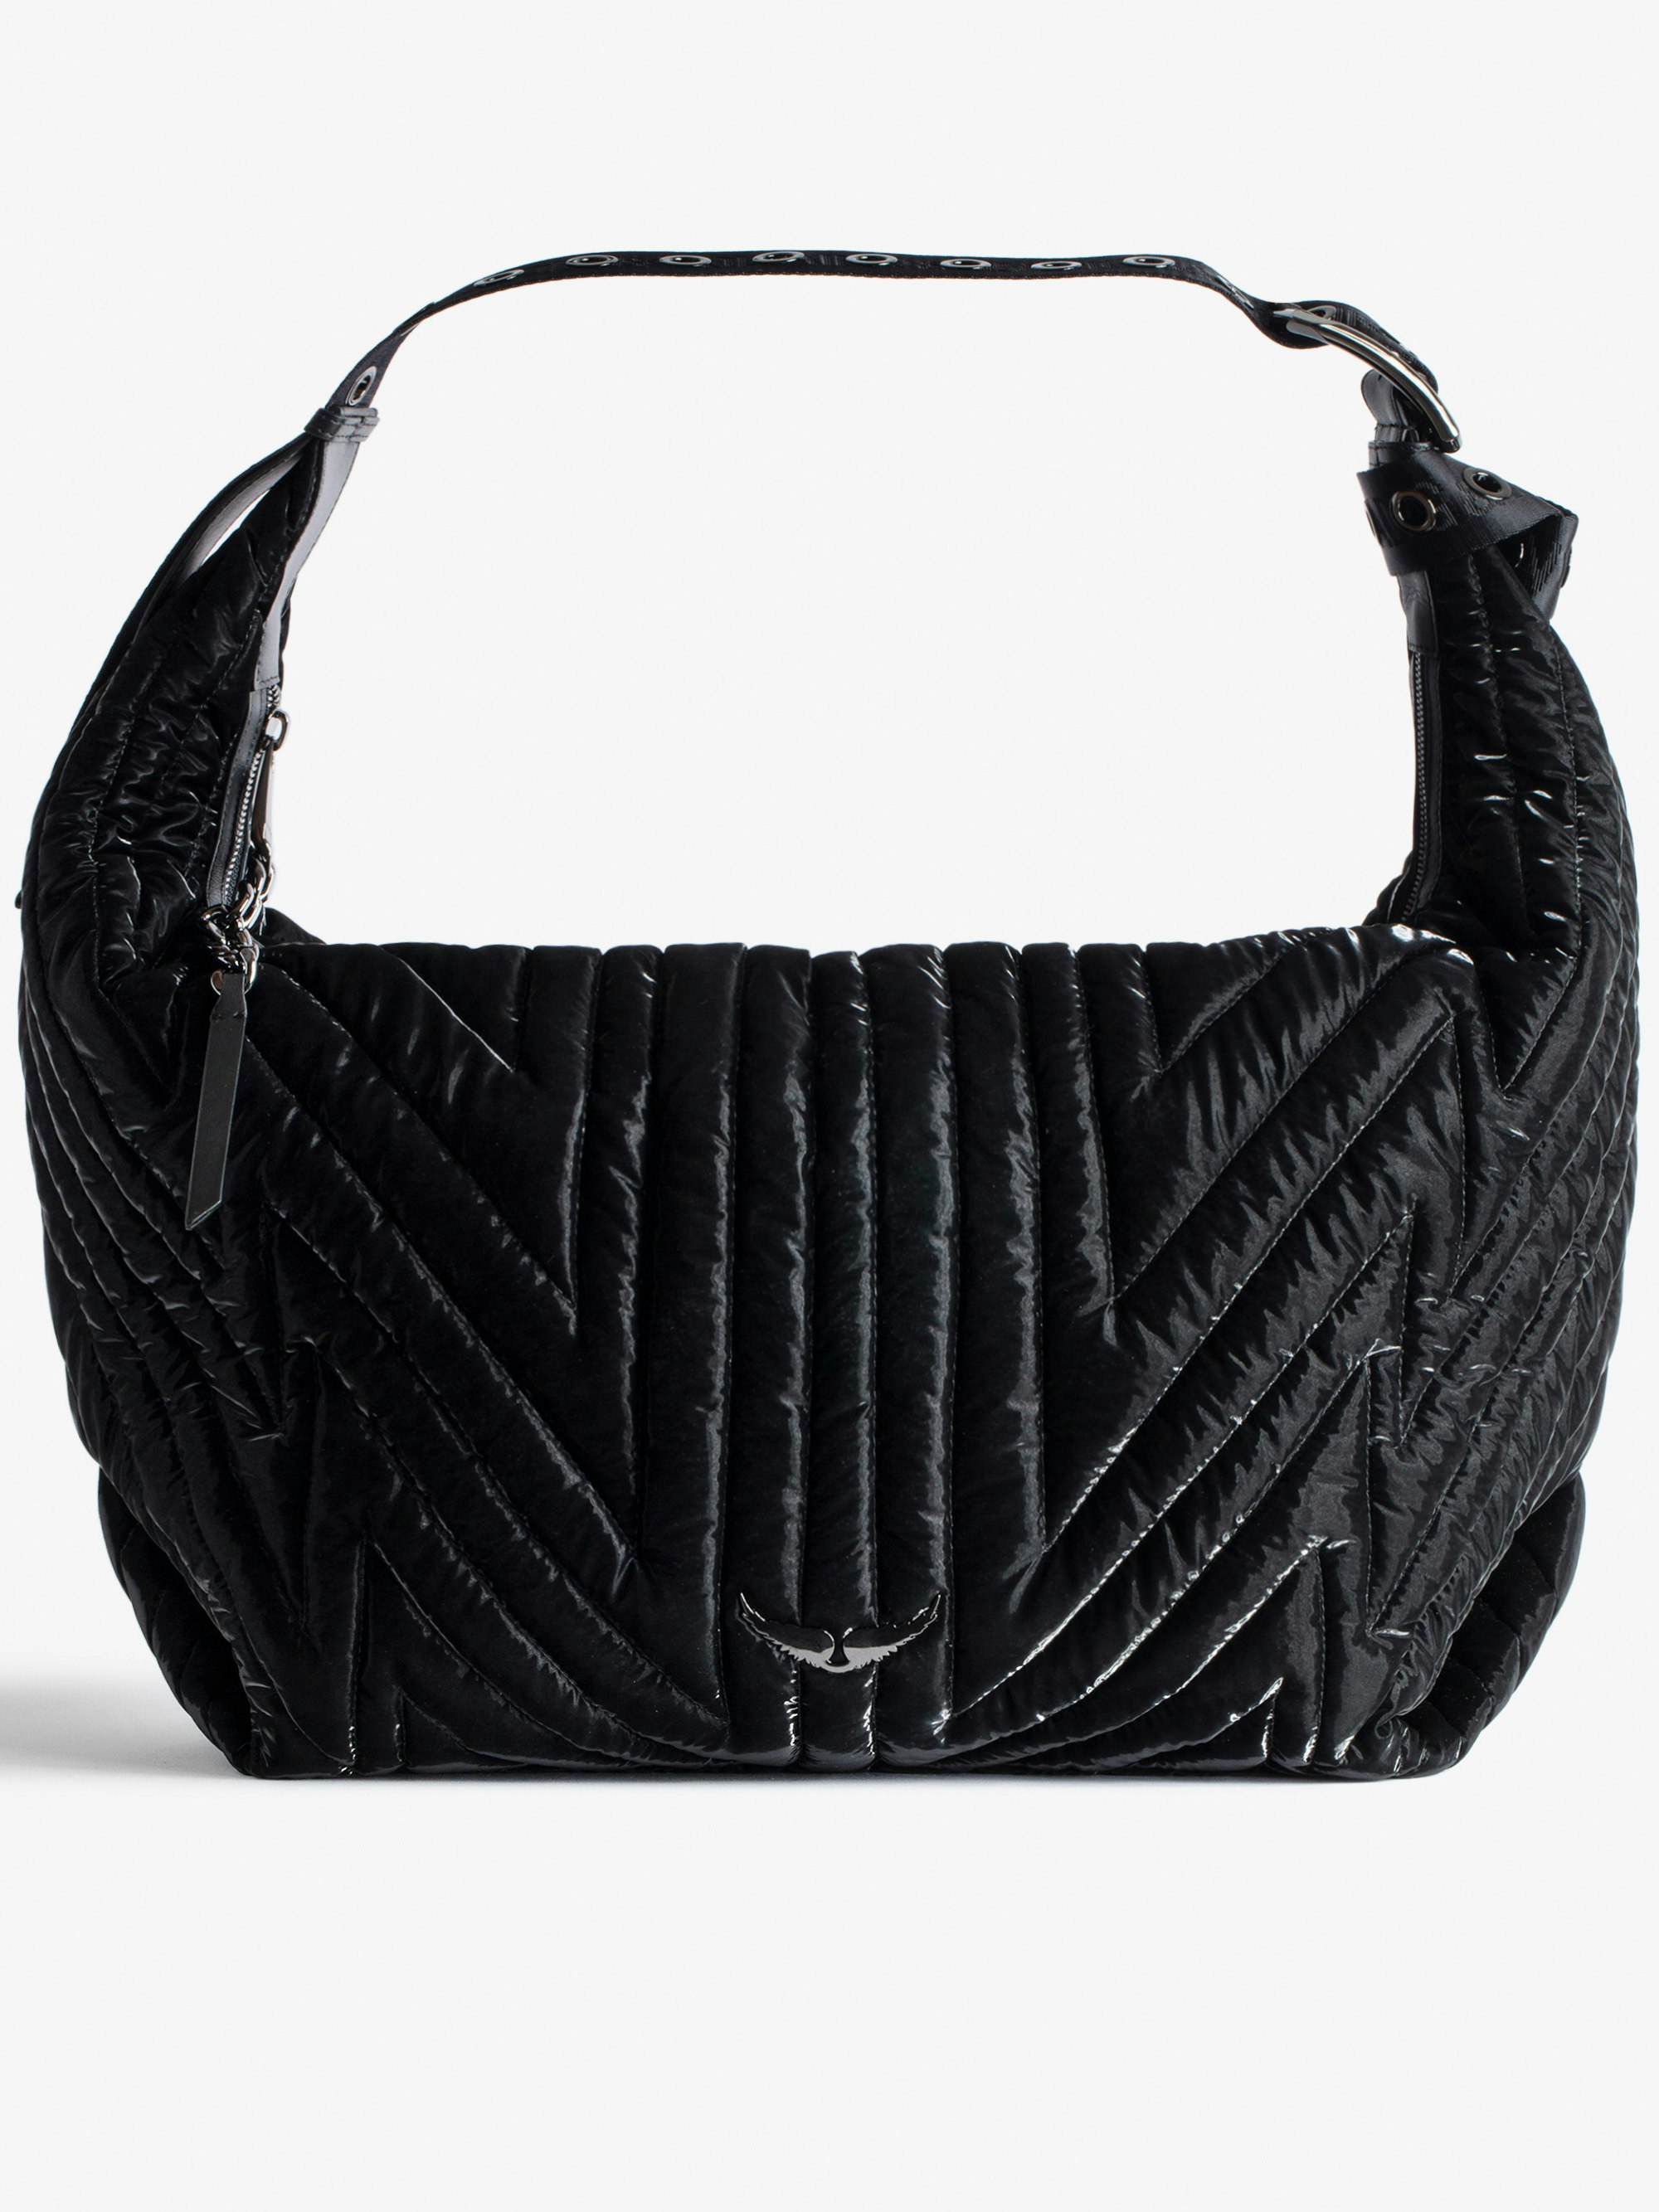 Le Cecilia XL Galactic Quilted Bag - Women’s oversized bag in black satin with shoulder strap and metal C buckle.